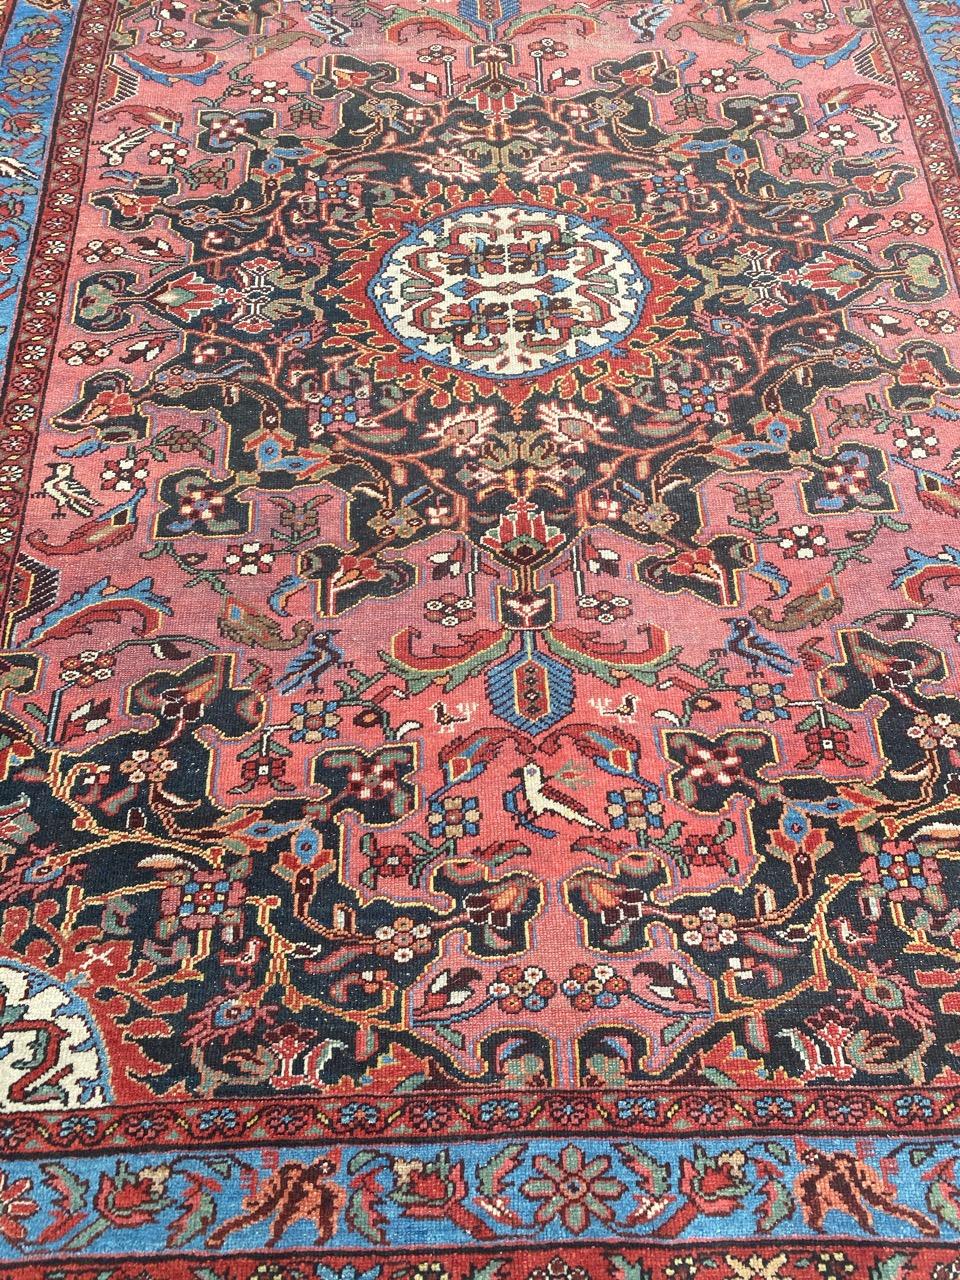 Very beautiful 19th century fine Malayer Farahan rug with beautiful design and beautiful natural colors, entirely and finely hand knotted with wool velvet on cotton foundation.

✨✨✨
